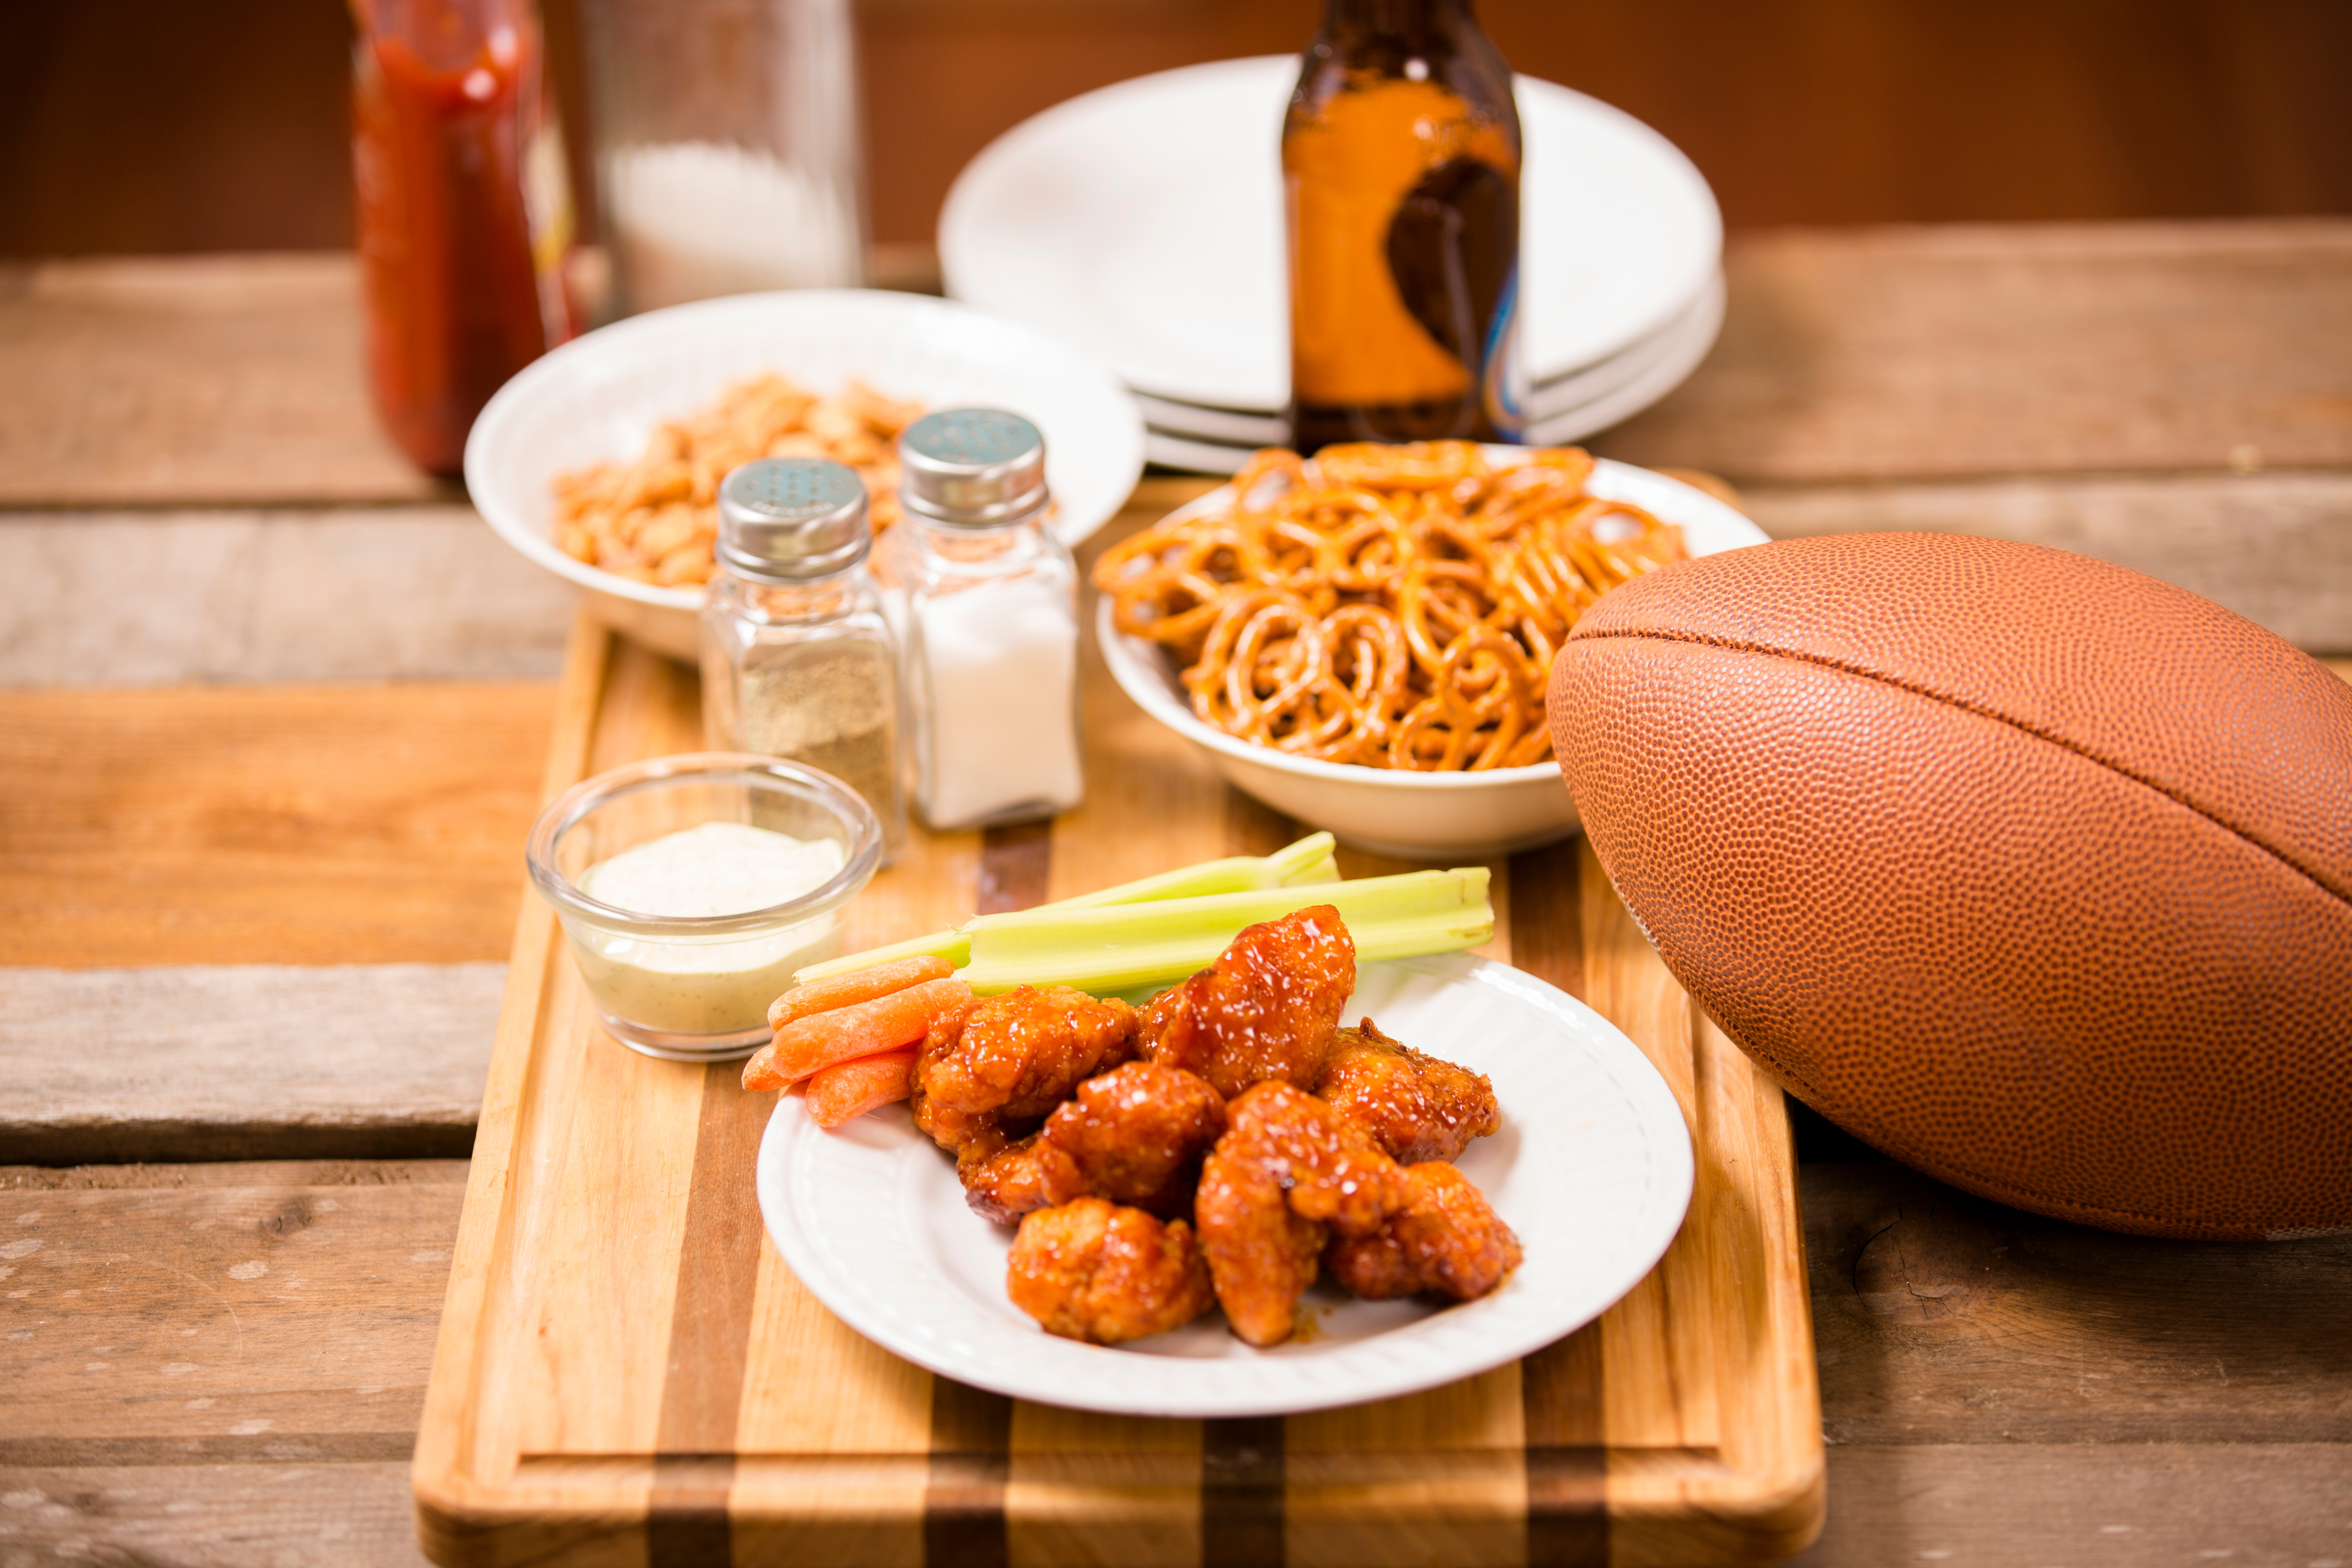 Super Bowl watch party in Nashville, Tennessee, offering food and drink specials.